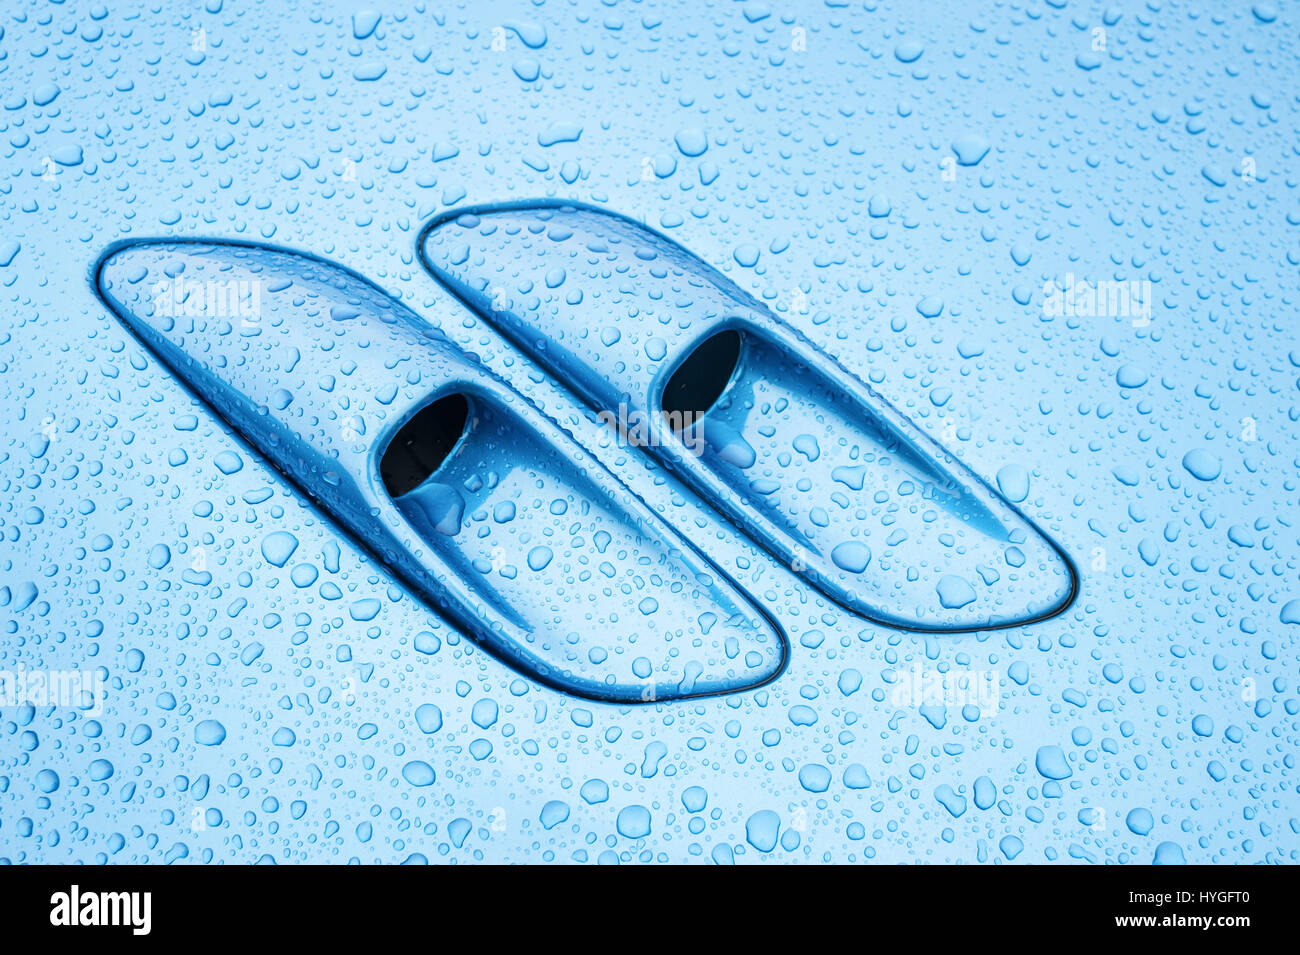 closeup of a metal vehicle panel soaked in raindrops Stock Photo